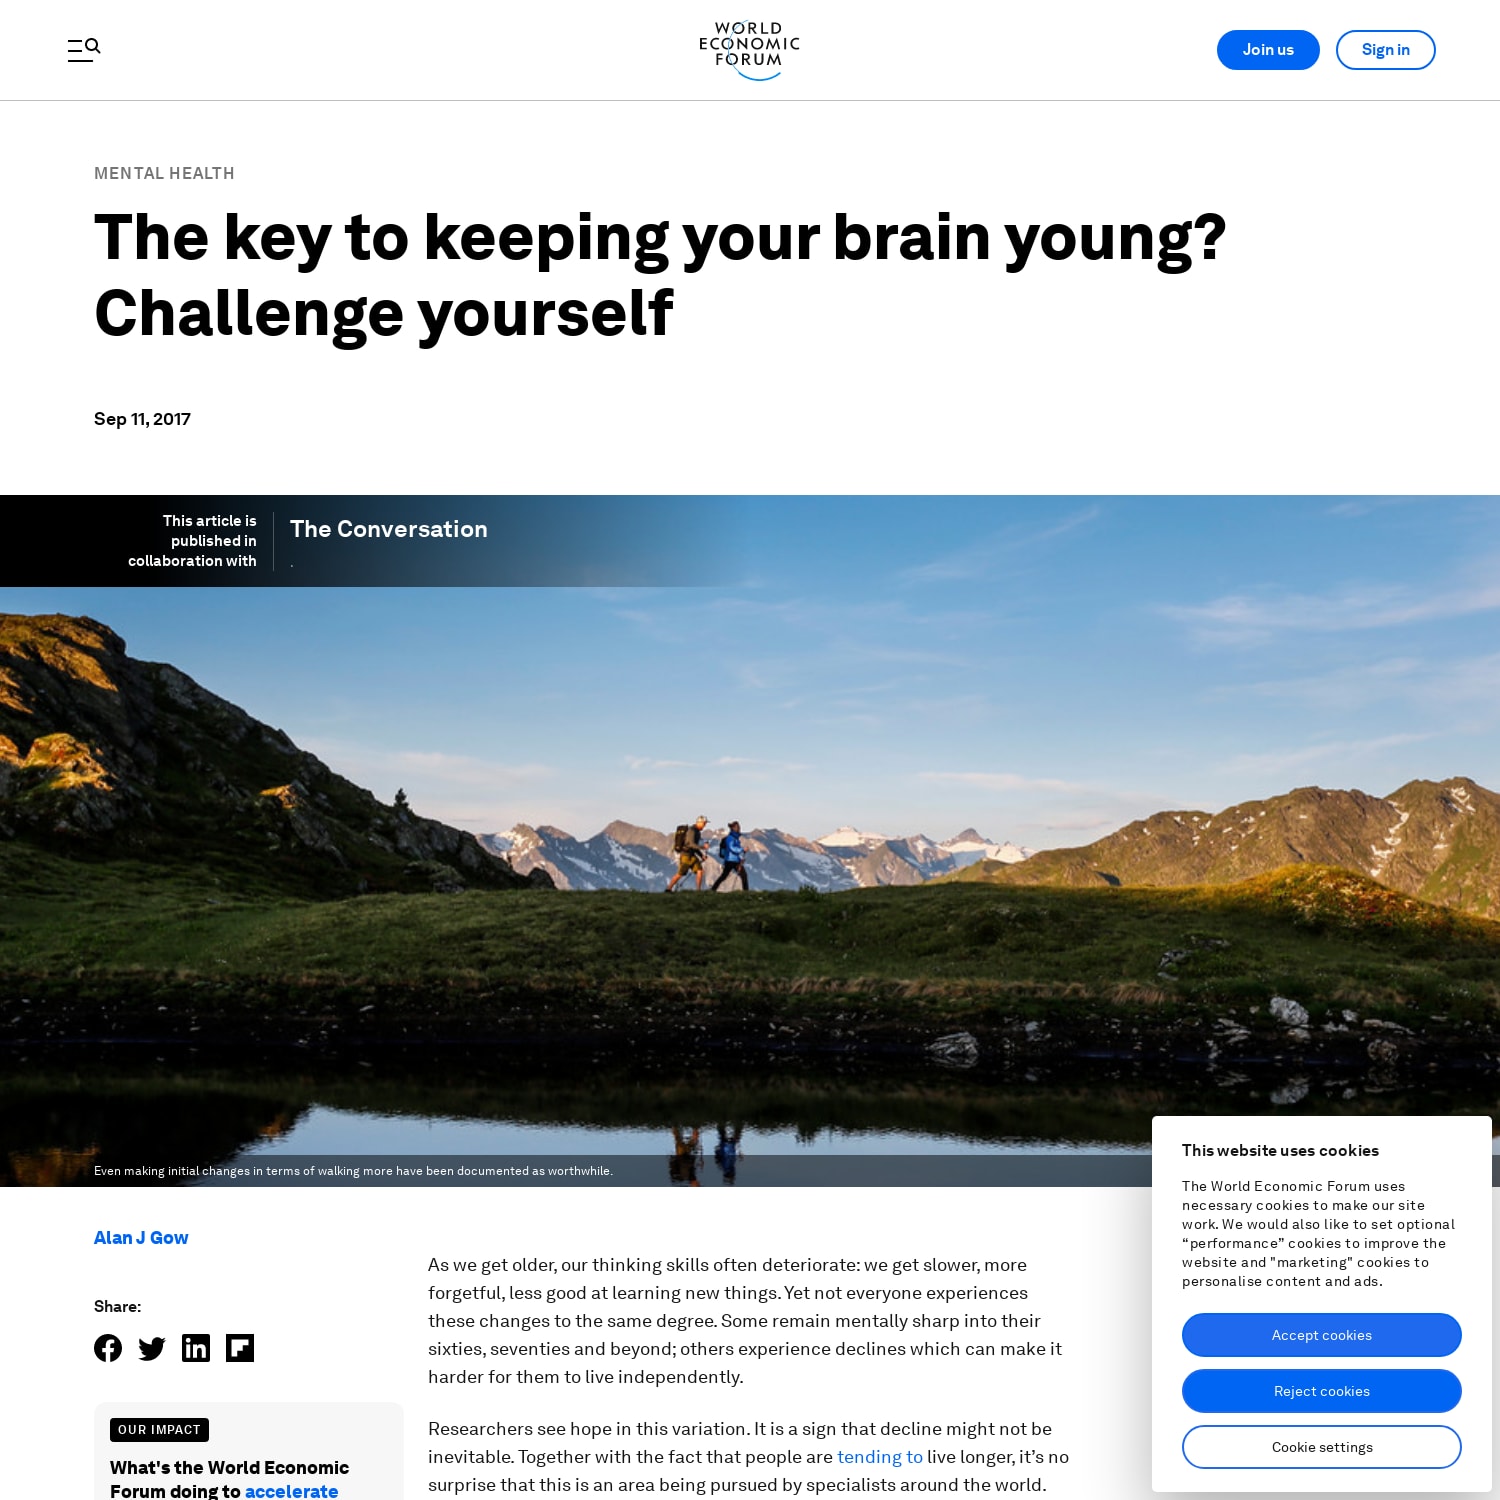 The key to keeping your brain young? Challenge yourself